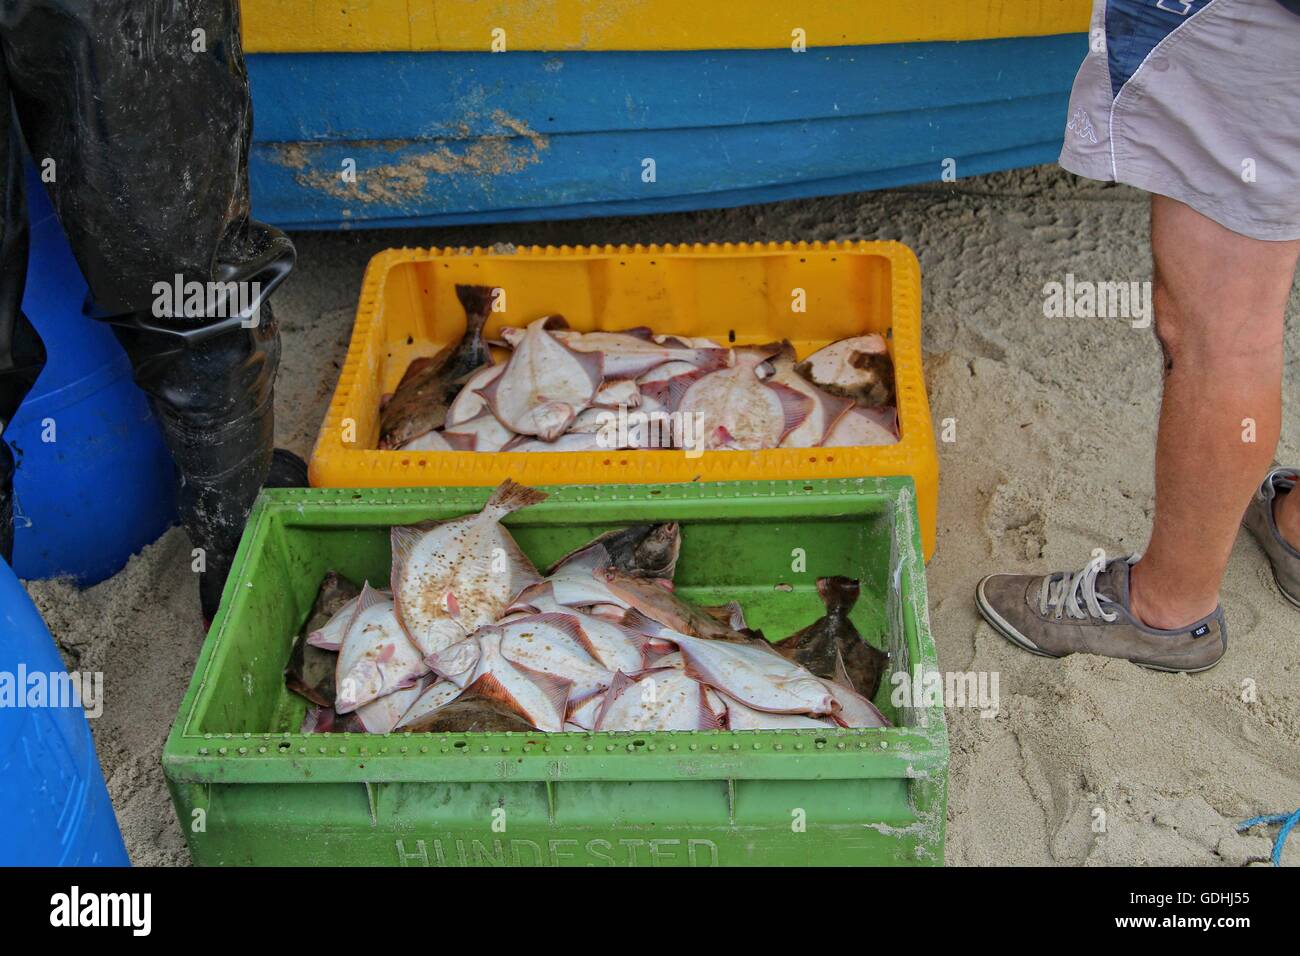 Piaski, Poland 17th, July 2016 Fishermen in Piaski return from the Baltic sea with caught flounders. Flounders (Platichthys flesus) and herring are the main basic species of fish caught this time of year in Baltic by Polish fishermen. Stock Photo